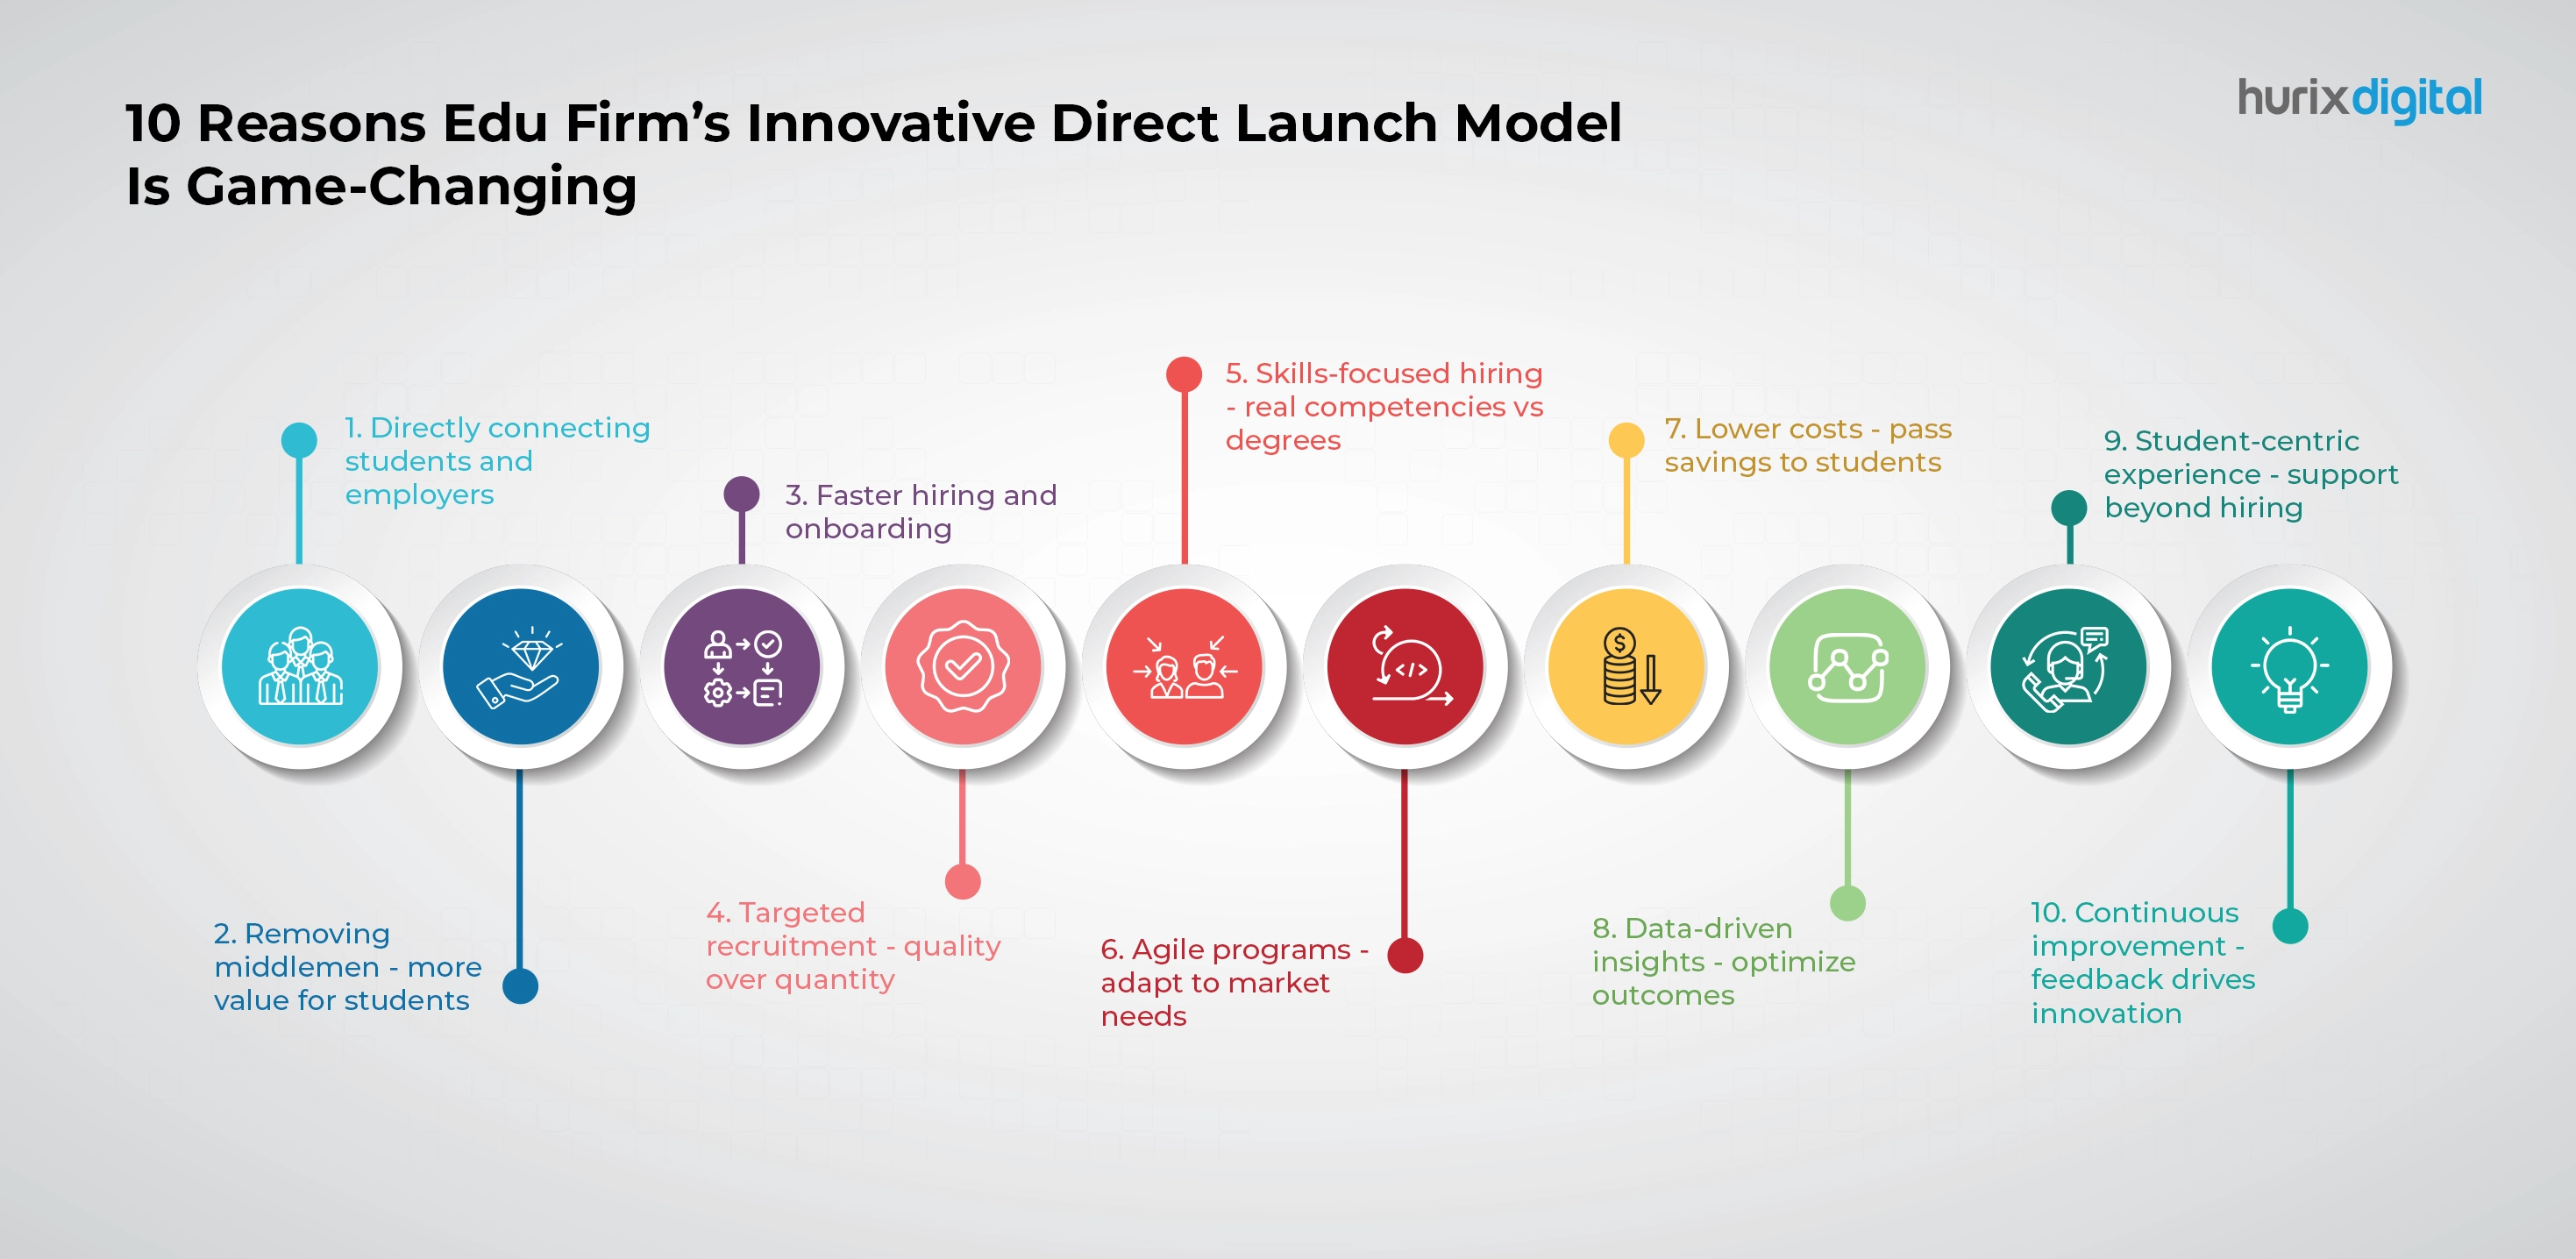 10 Reasons Edu Firm's Innovative Direct Launch Model Is Game-Changing